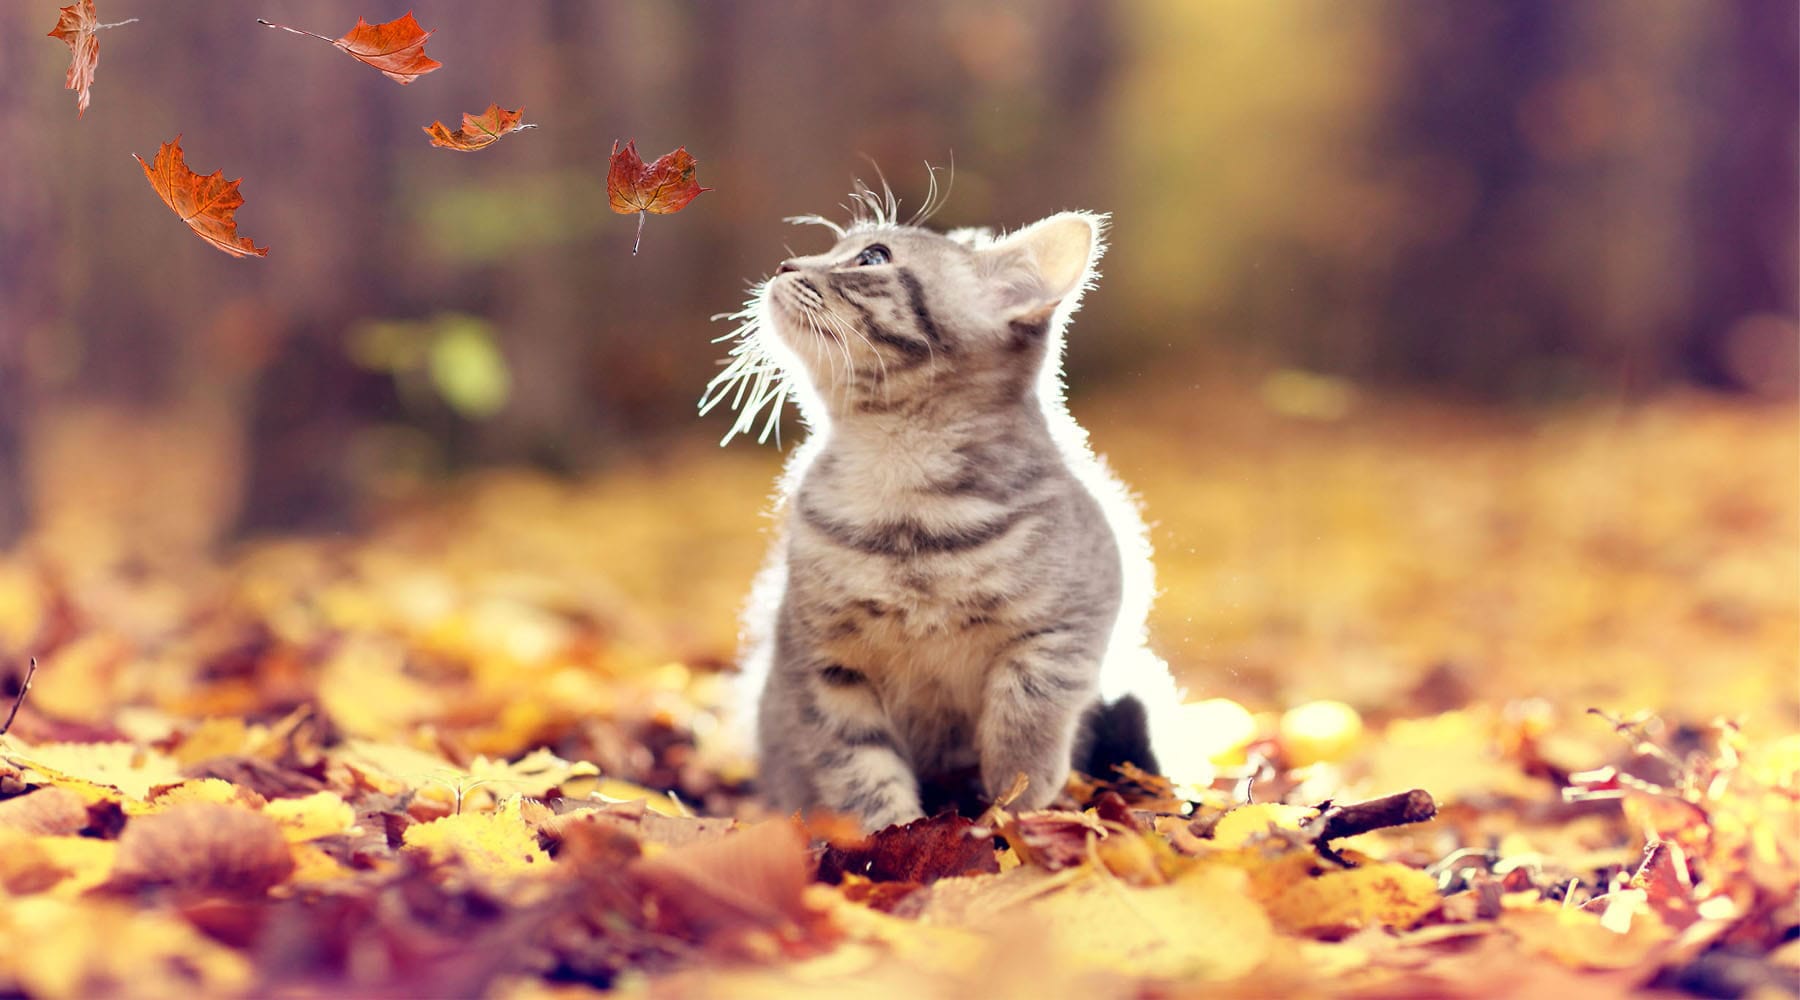 Kitten Looking at Fall Leaves